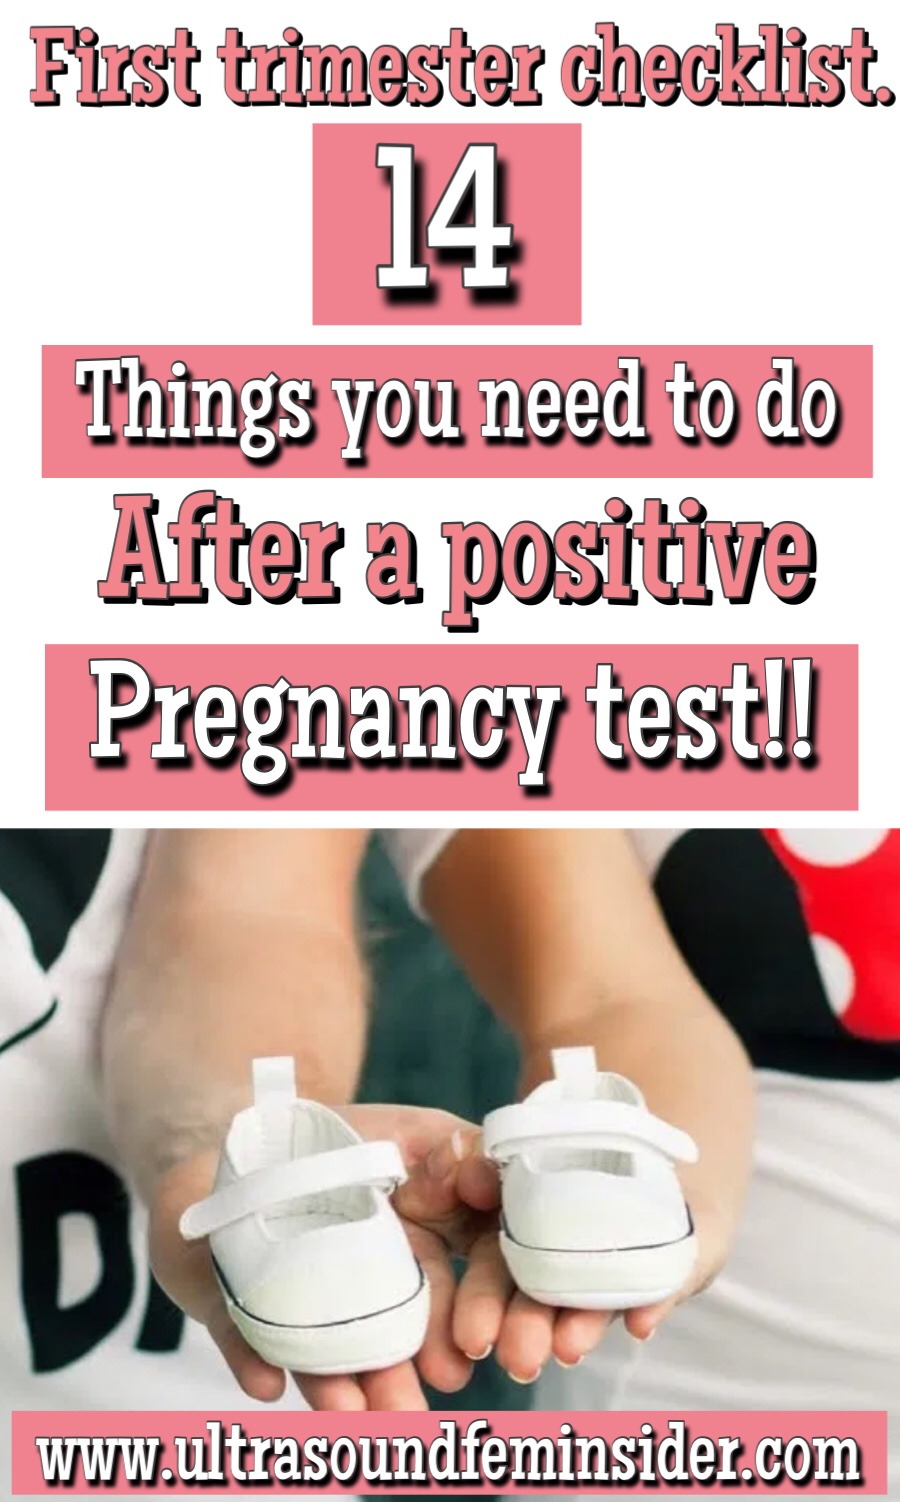 First trimester checklist. Things to do after a positive pregnancy test. 